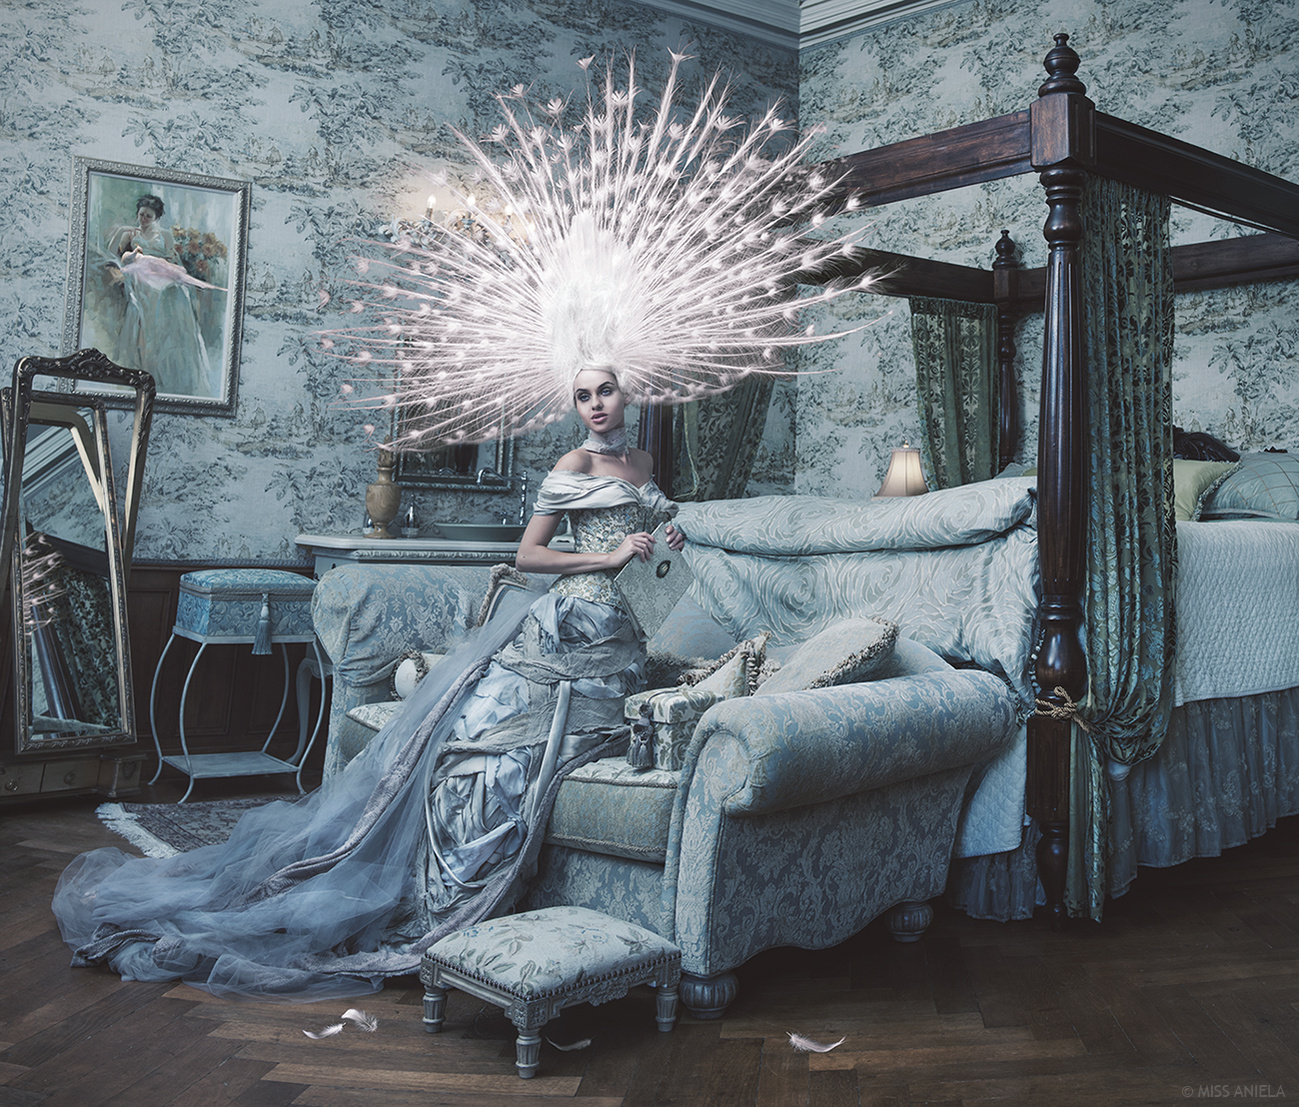 poster_plumage_miss_aniela_1300px